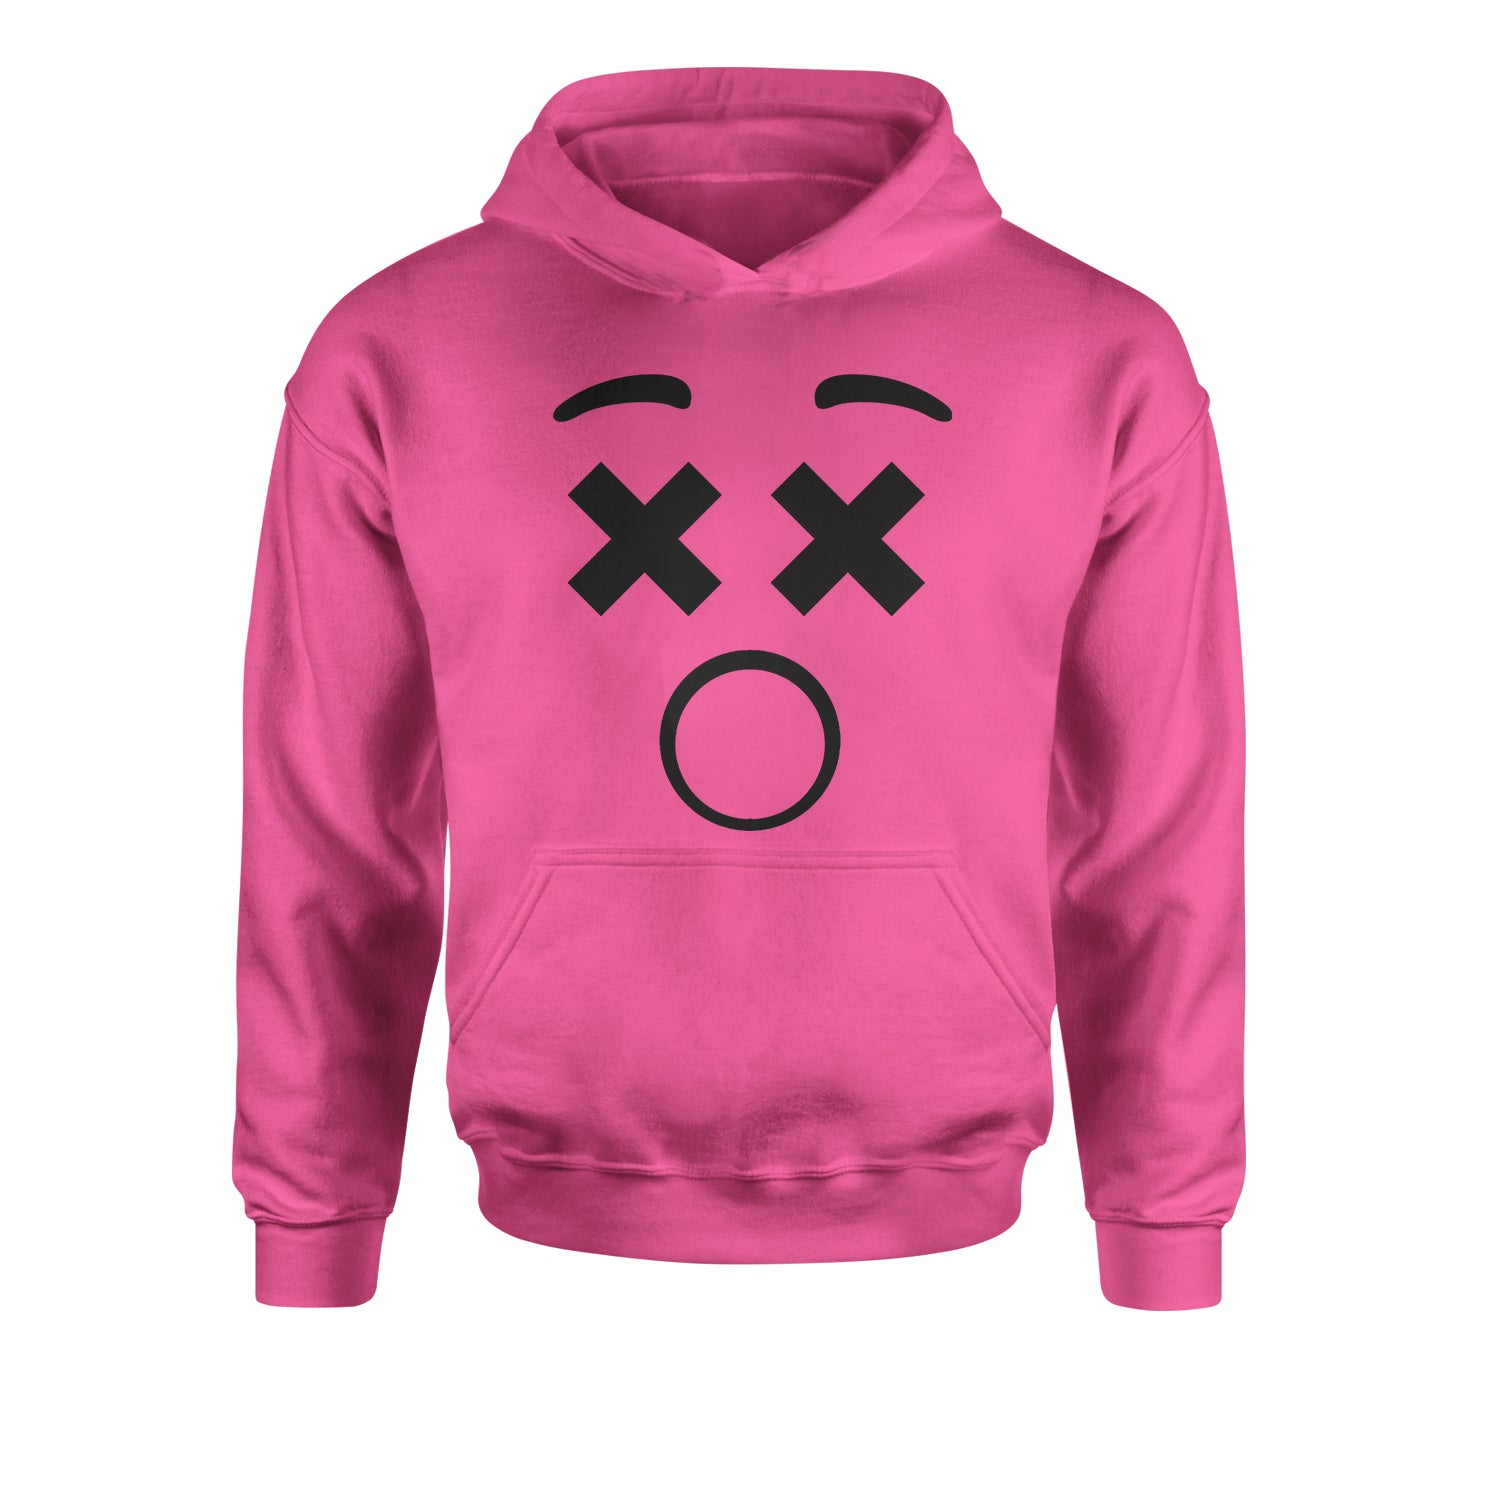 Emoticon XX Eyes Smile Face Youth-Sized Hoodie cosplay, costume, dress, emoji, emote, face, halloween, smiley, up, yellow, youth-sized by Expression Tees